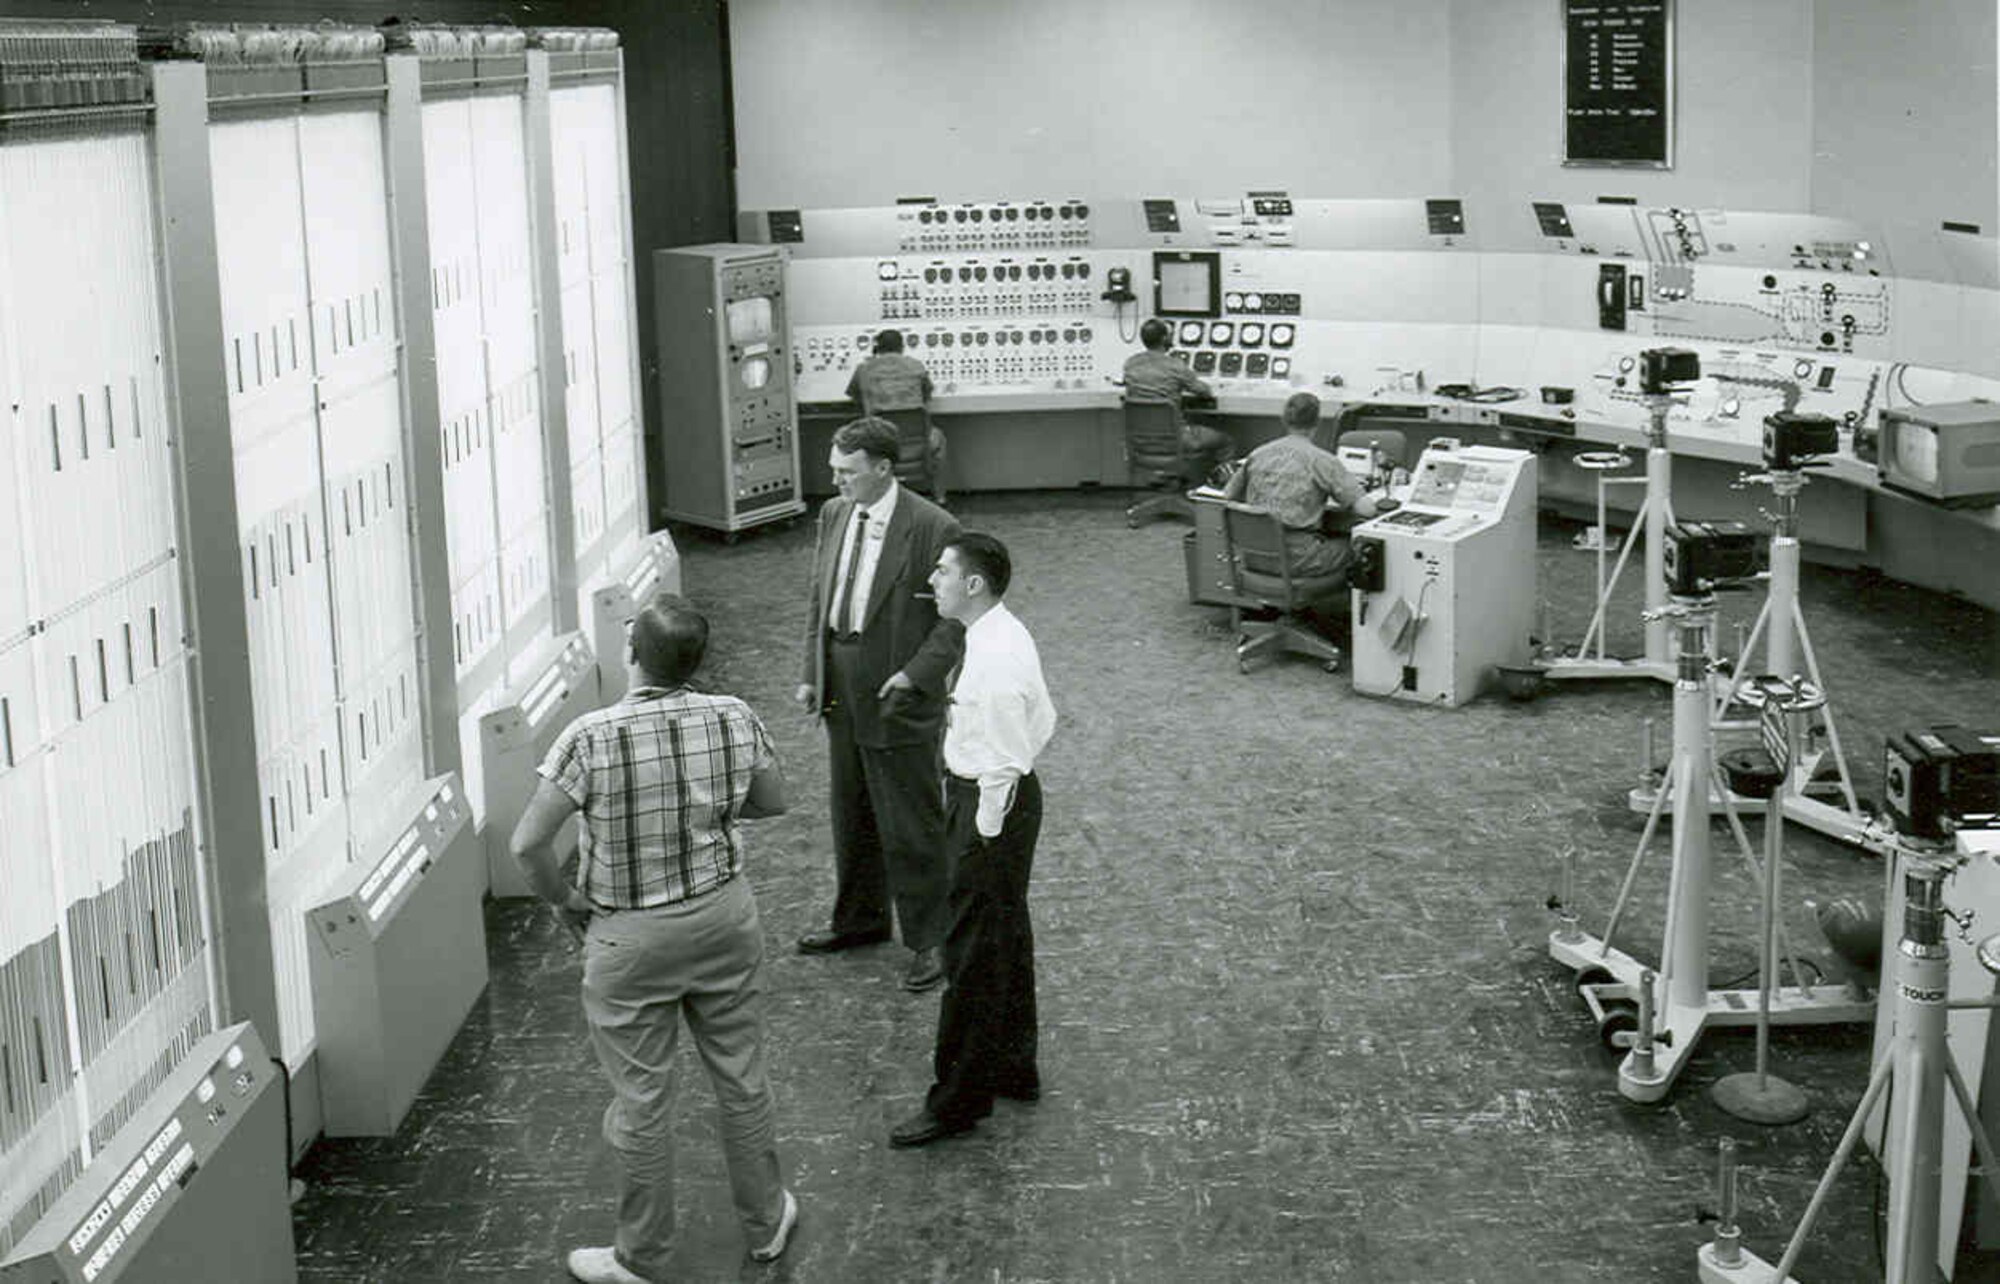 This 1957 photo of the Main Control Room-for the Propulsion Wind Tunnel’s transonic circuit shows manometer banks at left, for recording pressures from the tunnel’s test section. At the far rear is a closed-circuit television monitor which shows the test item on its screen. The tunnel’s chief operator is seated in the center of the room. (AEDC photo)